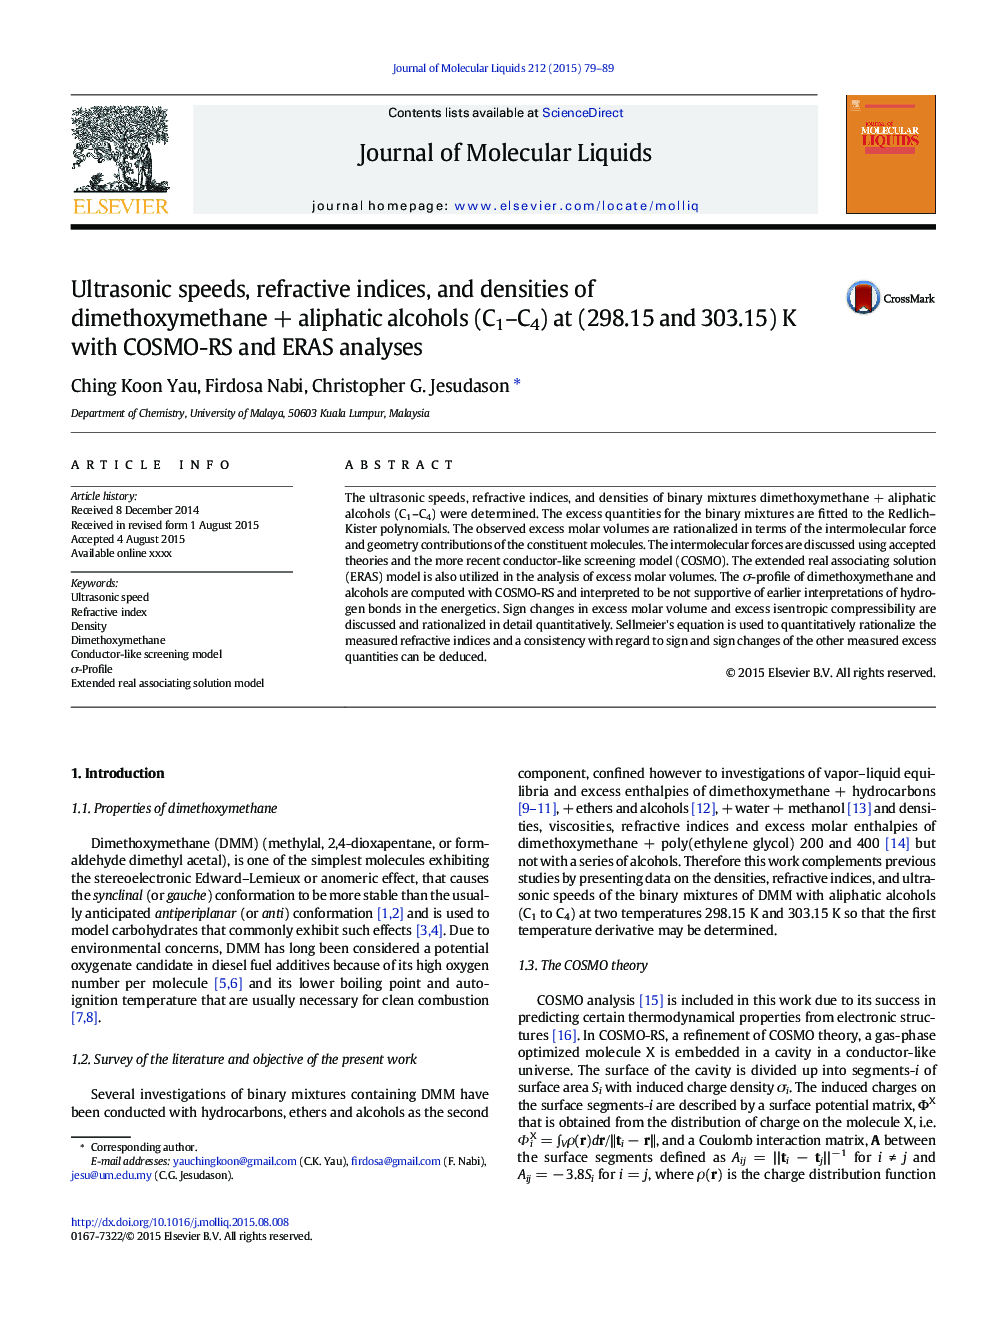 Ultrasonic speeds, refractive indices, and densities of dimethoxymethaneÂ +Â aliphatic alcohols (C1-C4) at (298.15 and 303.15) K with COSMO-RS and ERAS analyses